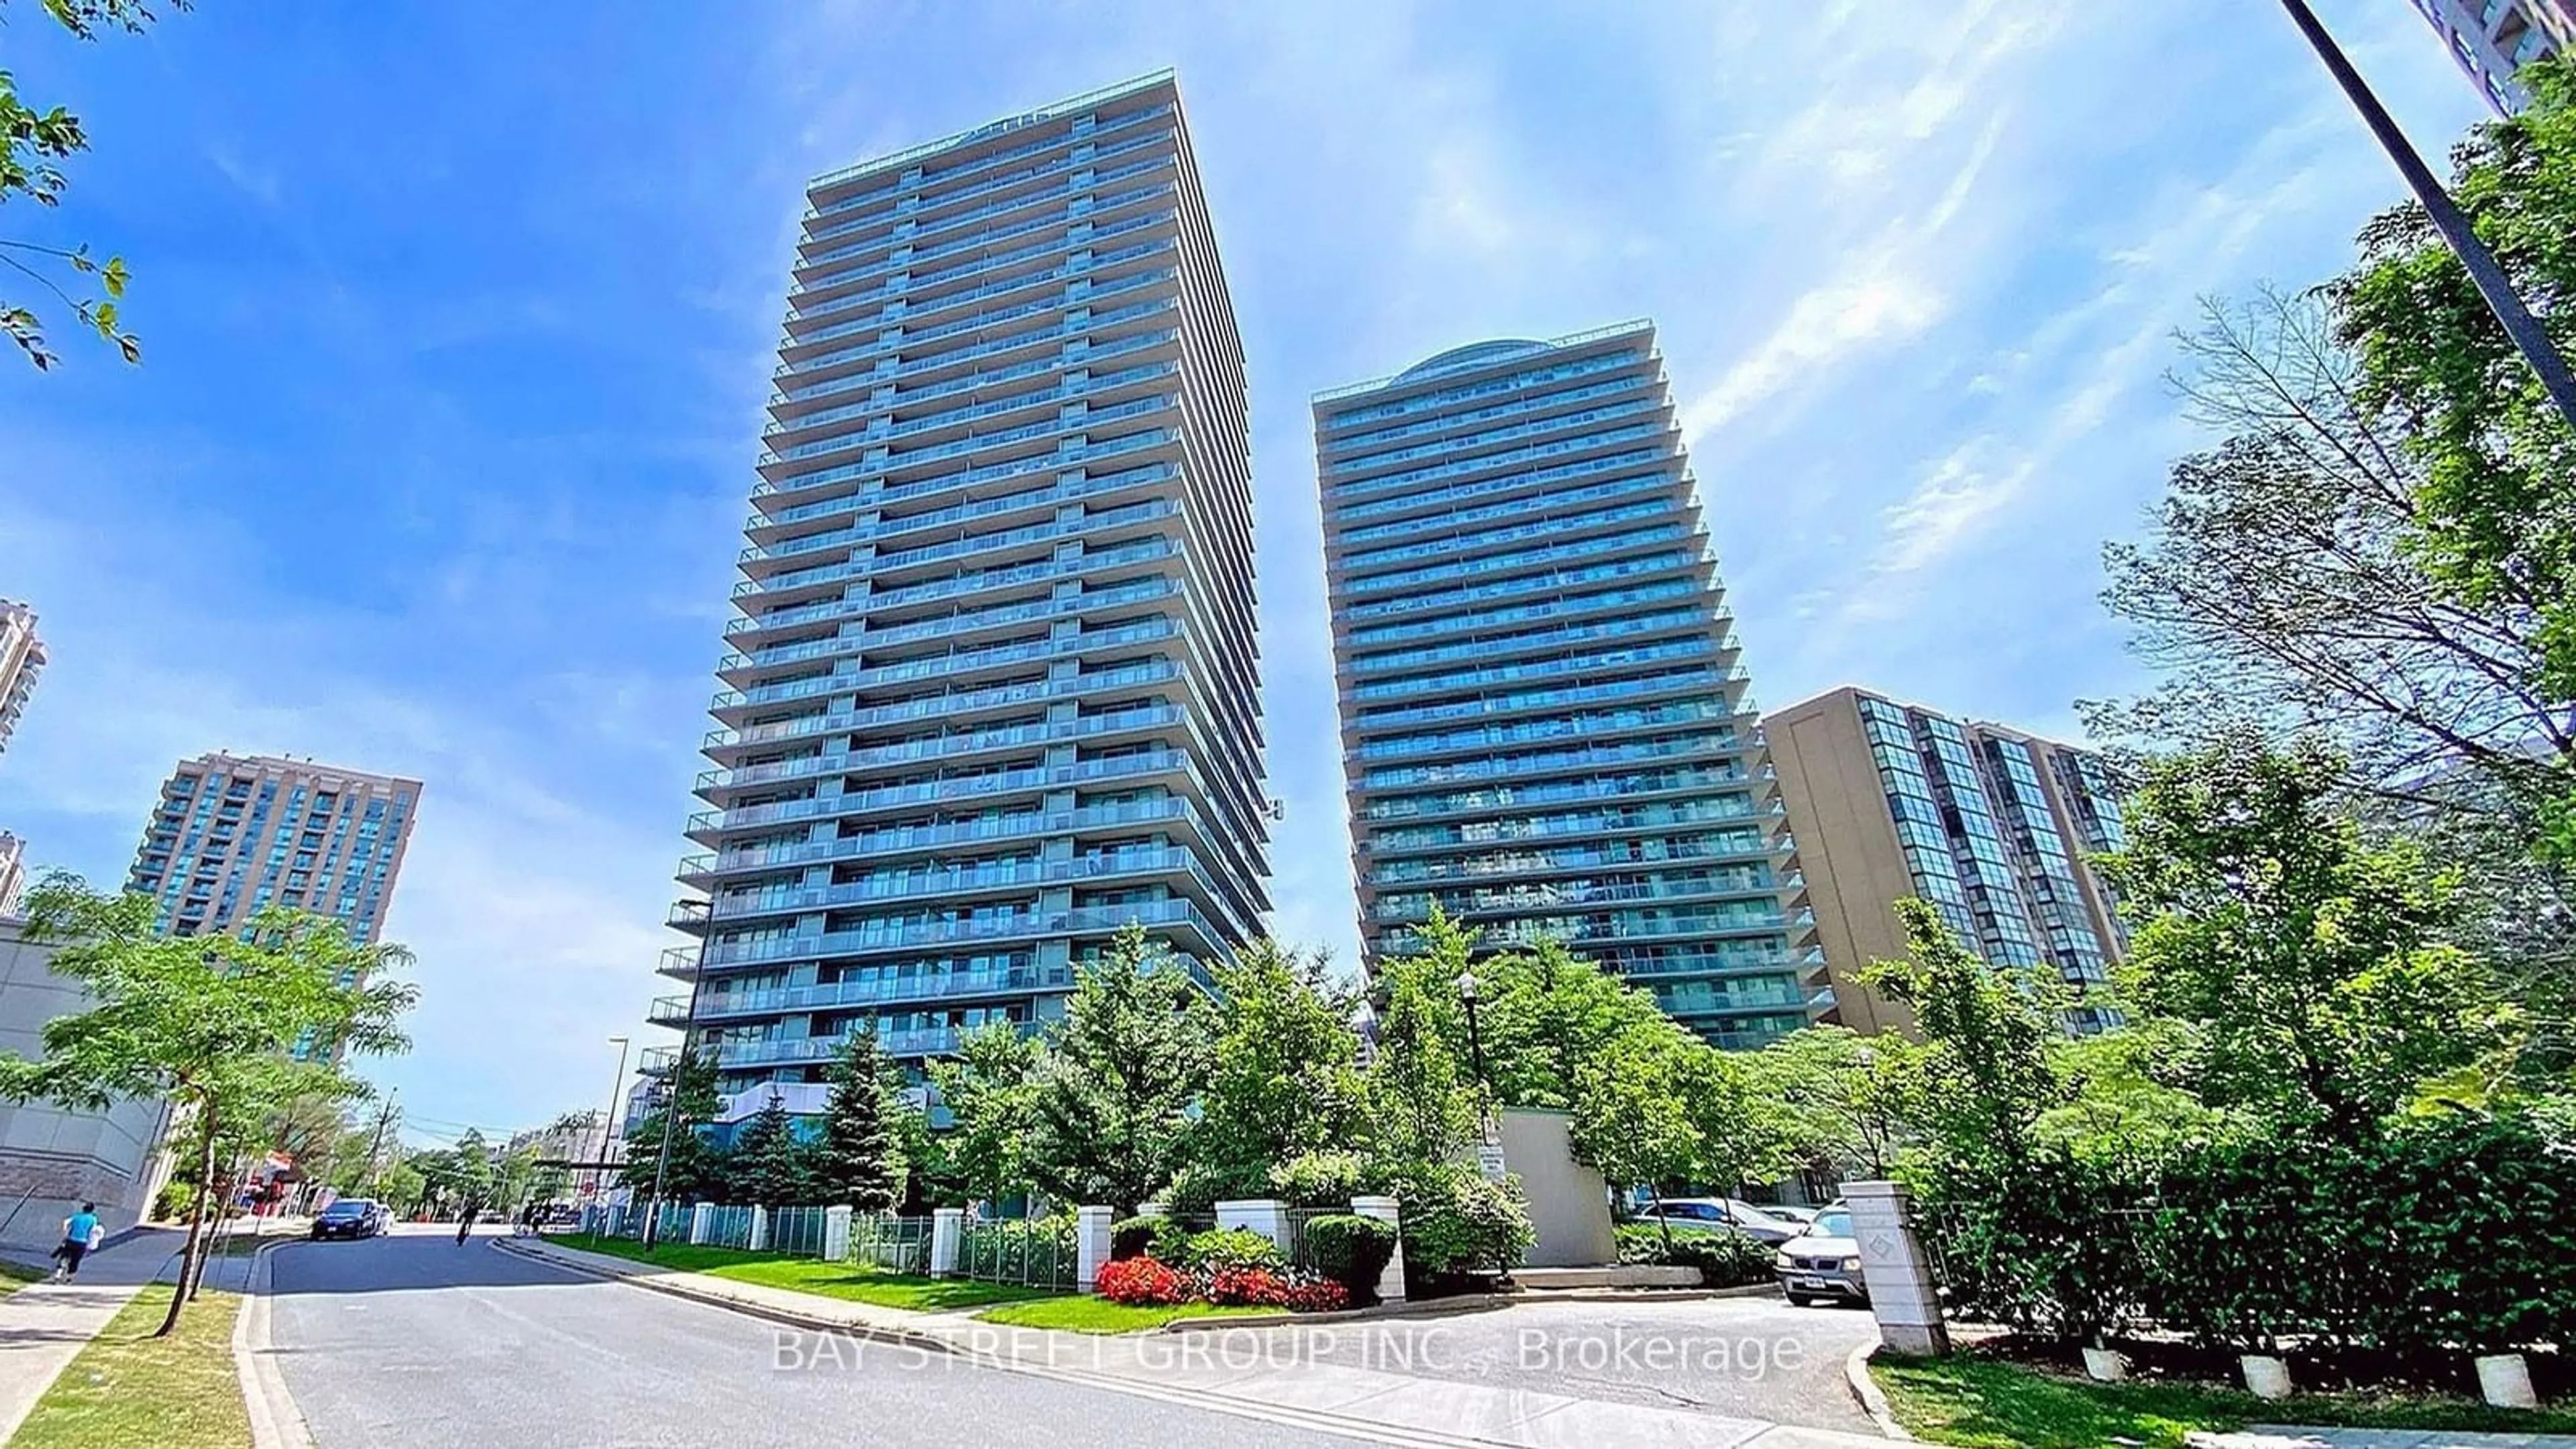 A pic from exterior of the house or condo for 5500 Yonge St #803, Toronto Ontario M2N 7L1